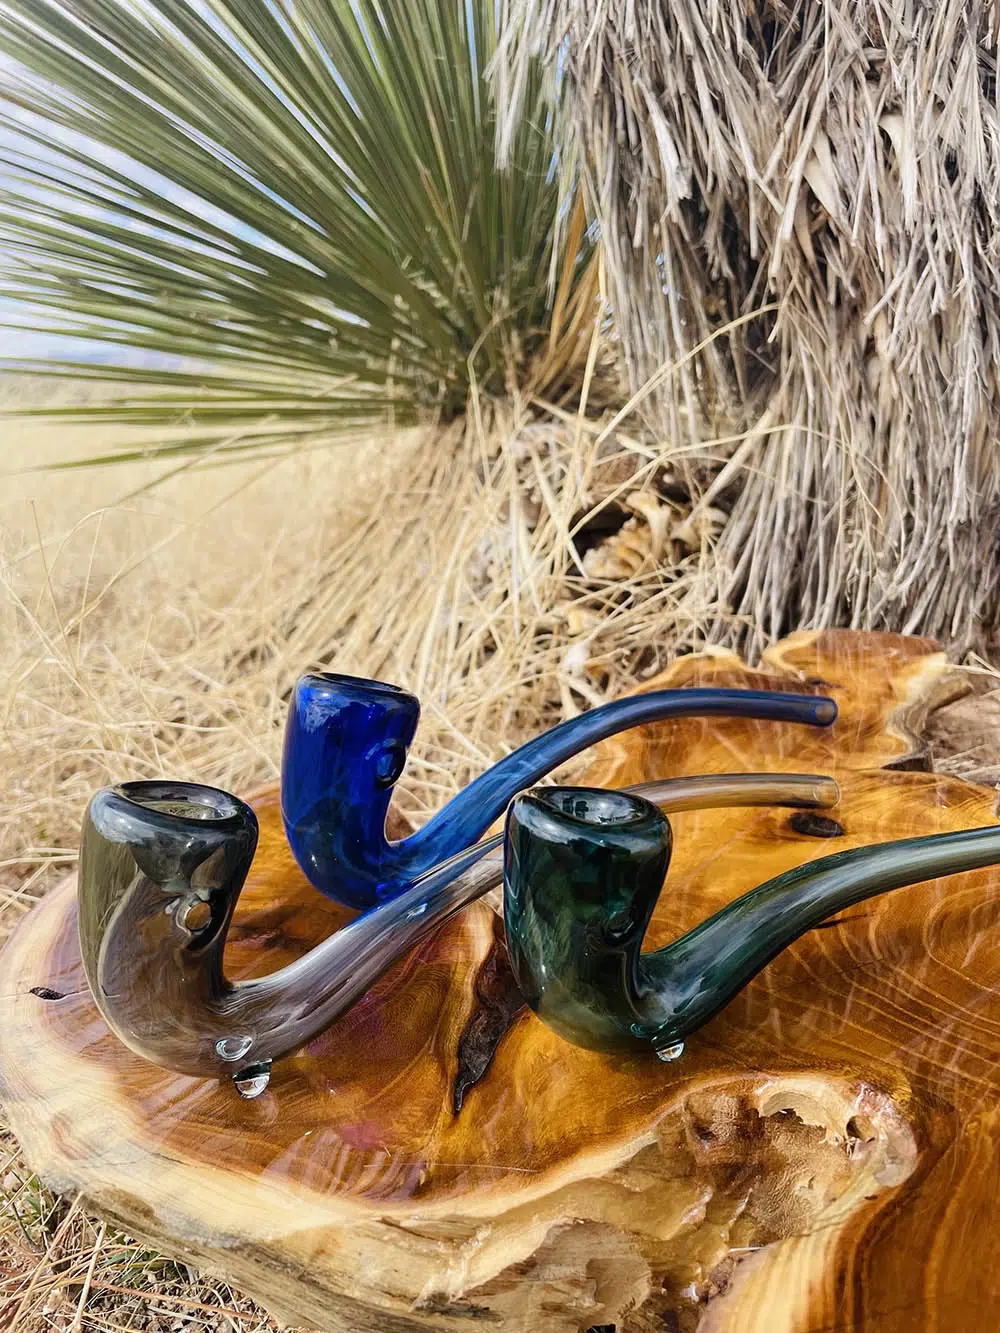 closeup of three gandalfs pipes in teal black and blue on stained textured wood piece with catctus palm and dried. yellow brush behind